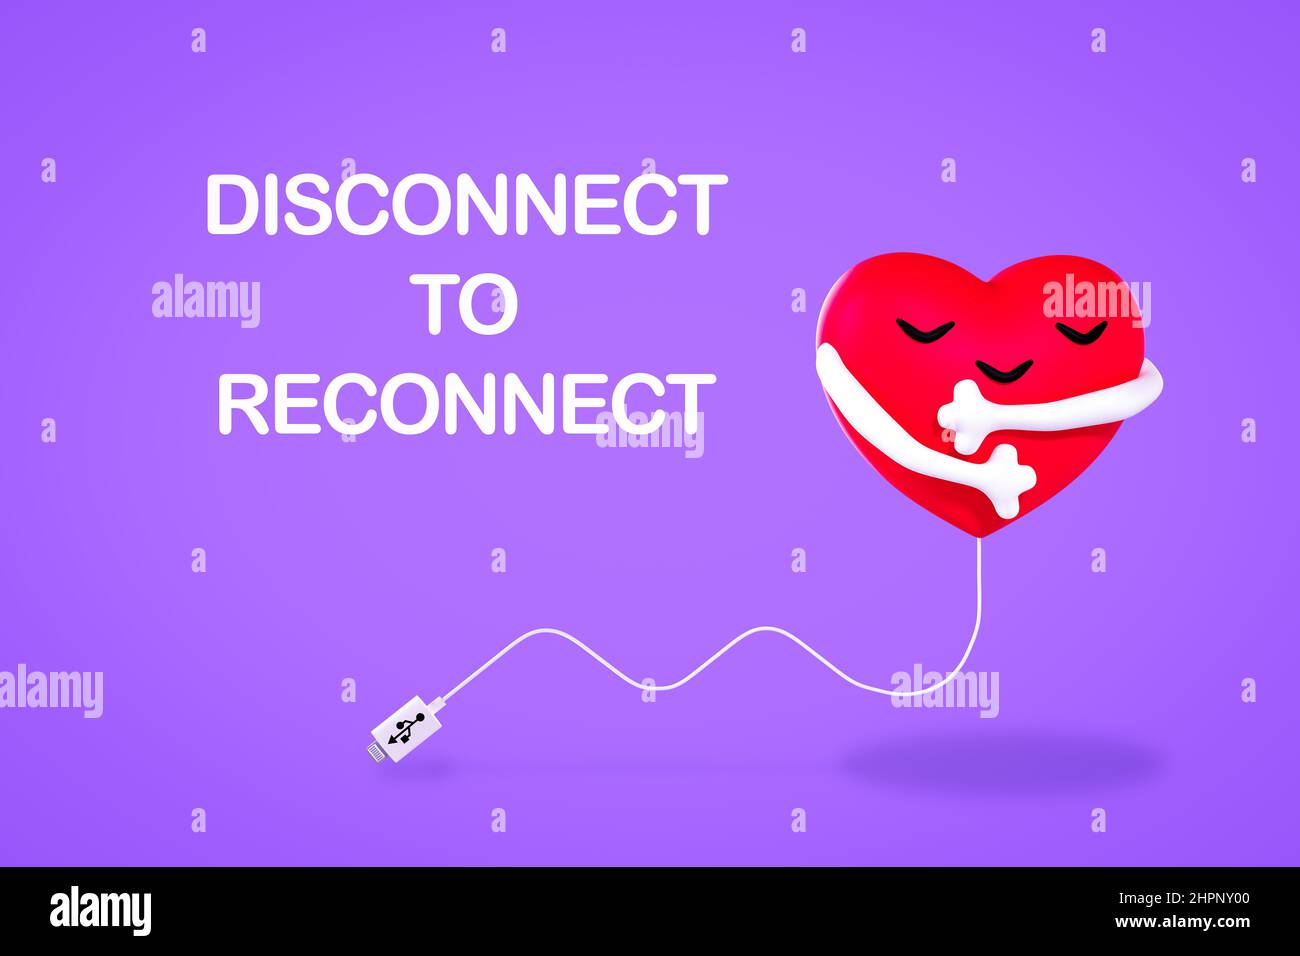 Disconnect to reconnect to yourself, digital detox, heart hugging itself, 3D illustration Stock Photo